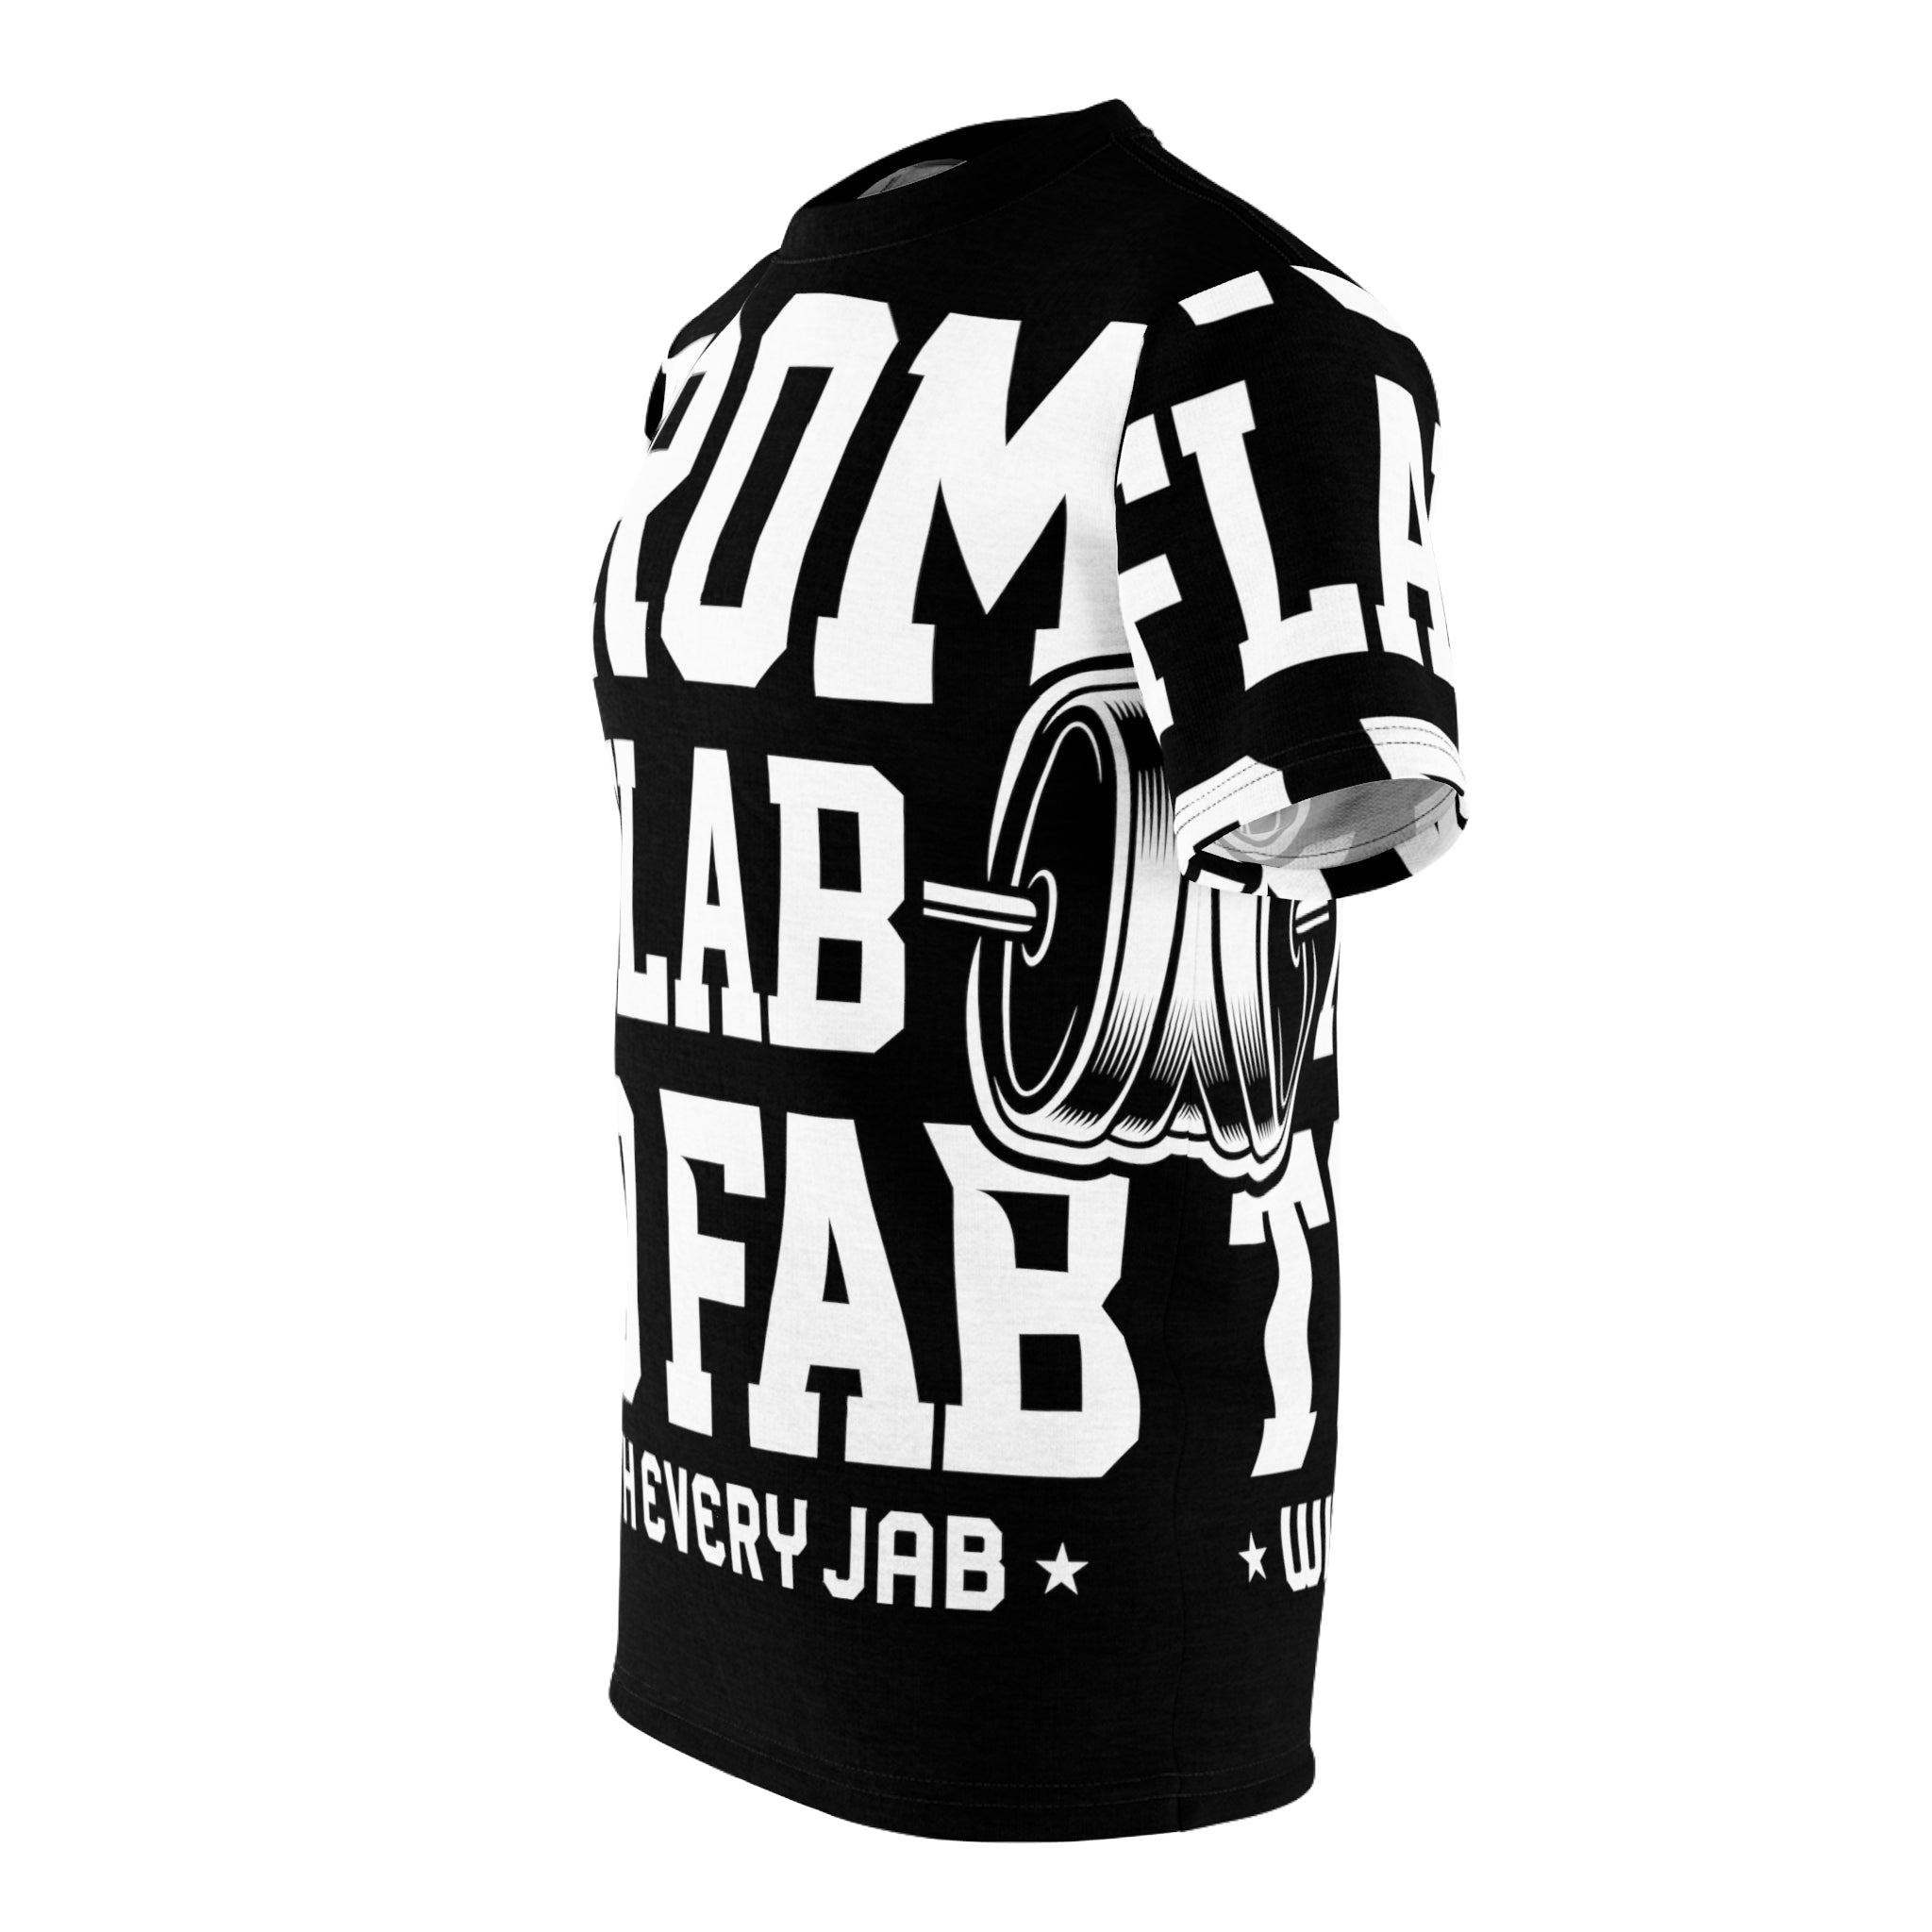 "From Flab to Fab - With Every Jab" Unisex Cut & Sew Tee (AOP)